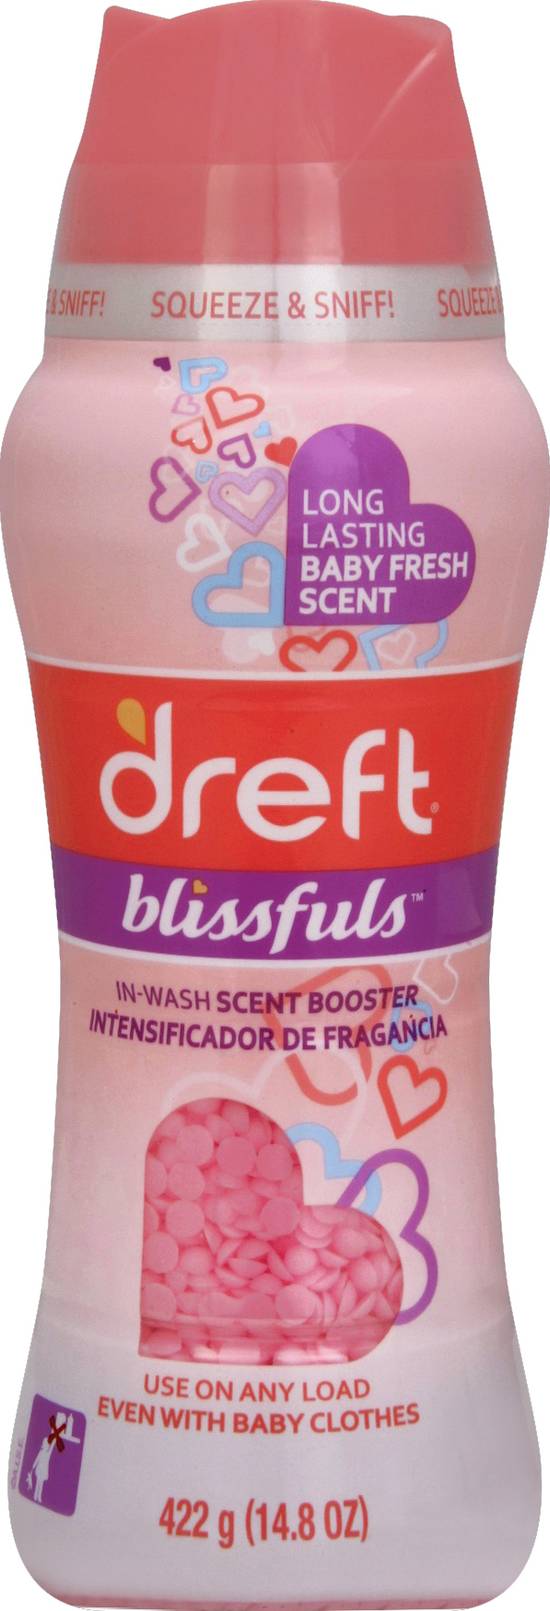 Dreft Blissfuls In-Wash Baby Fresh Scent Booster